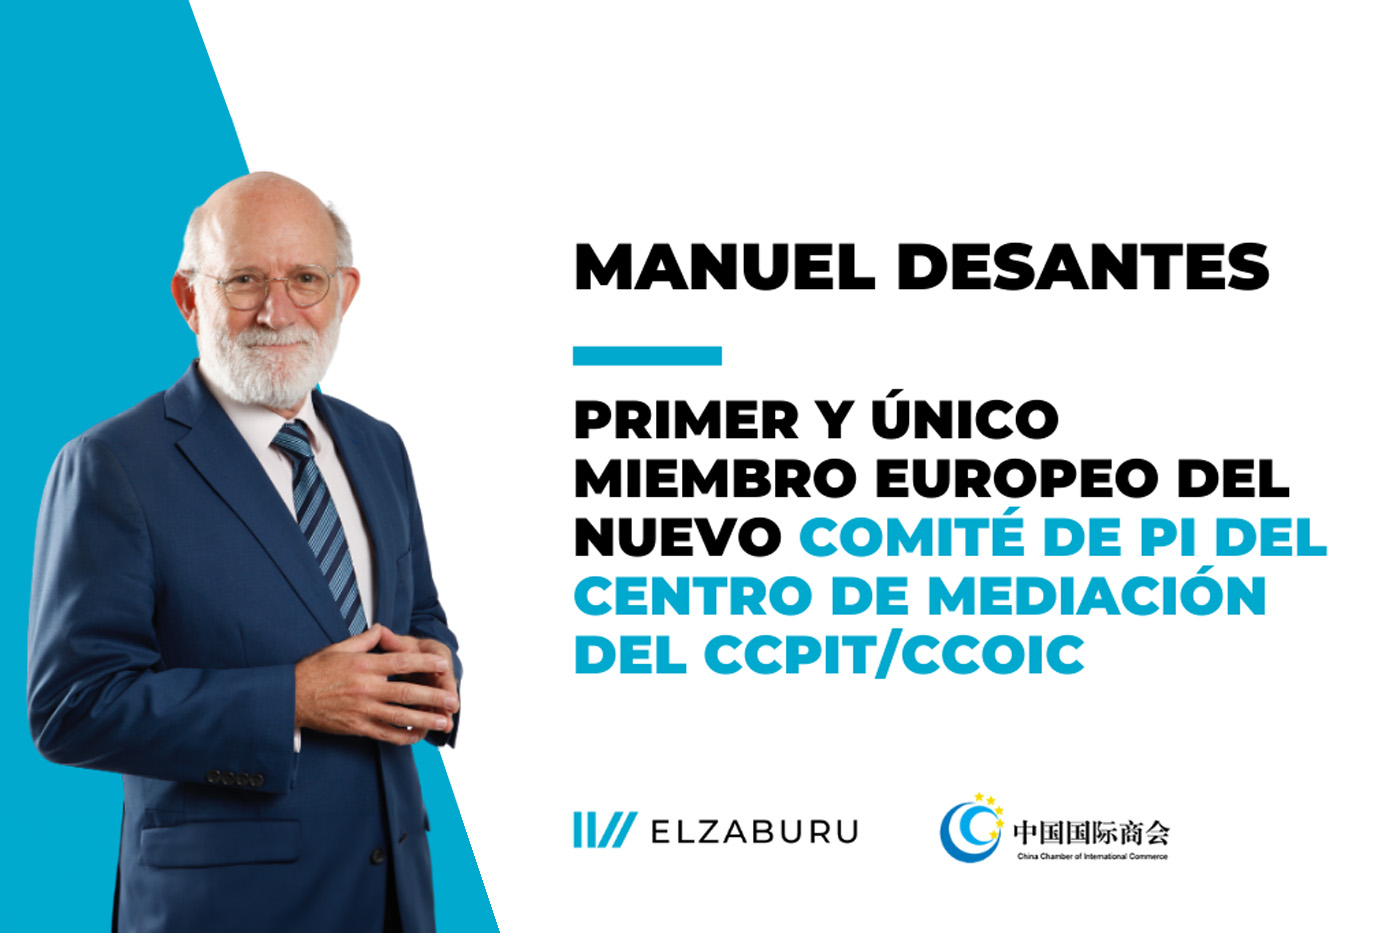 Manuel Desantes, first and only European member of the new Intellectual Property committee of the CCPIT/CCOIC mediation center